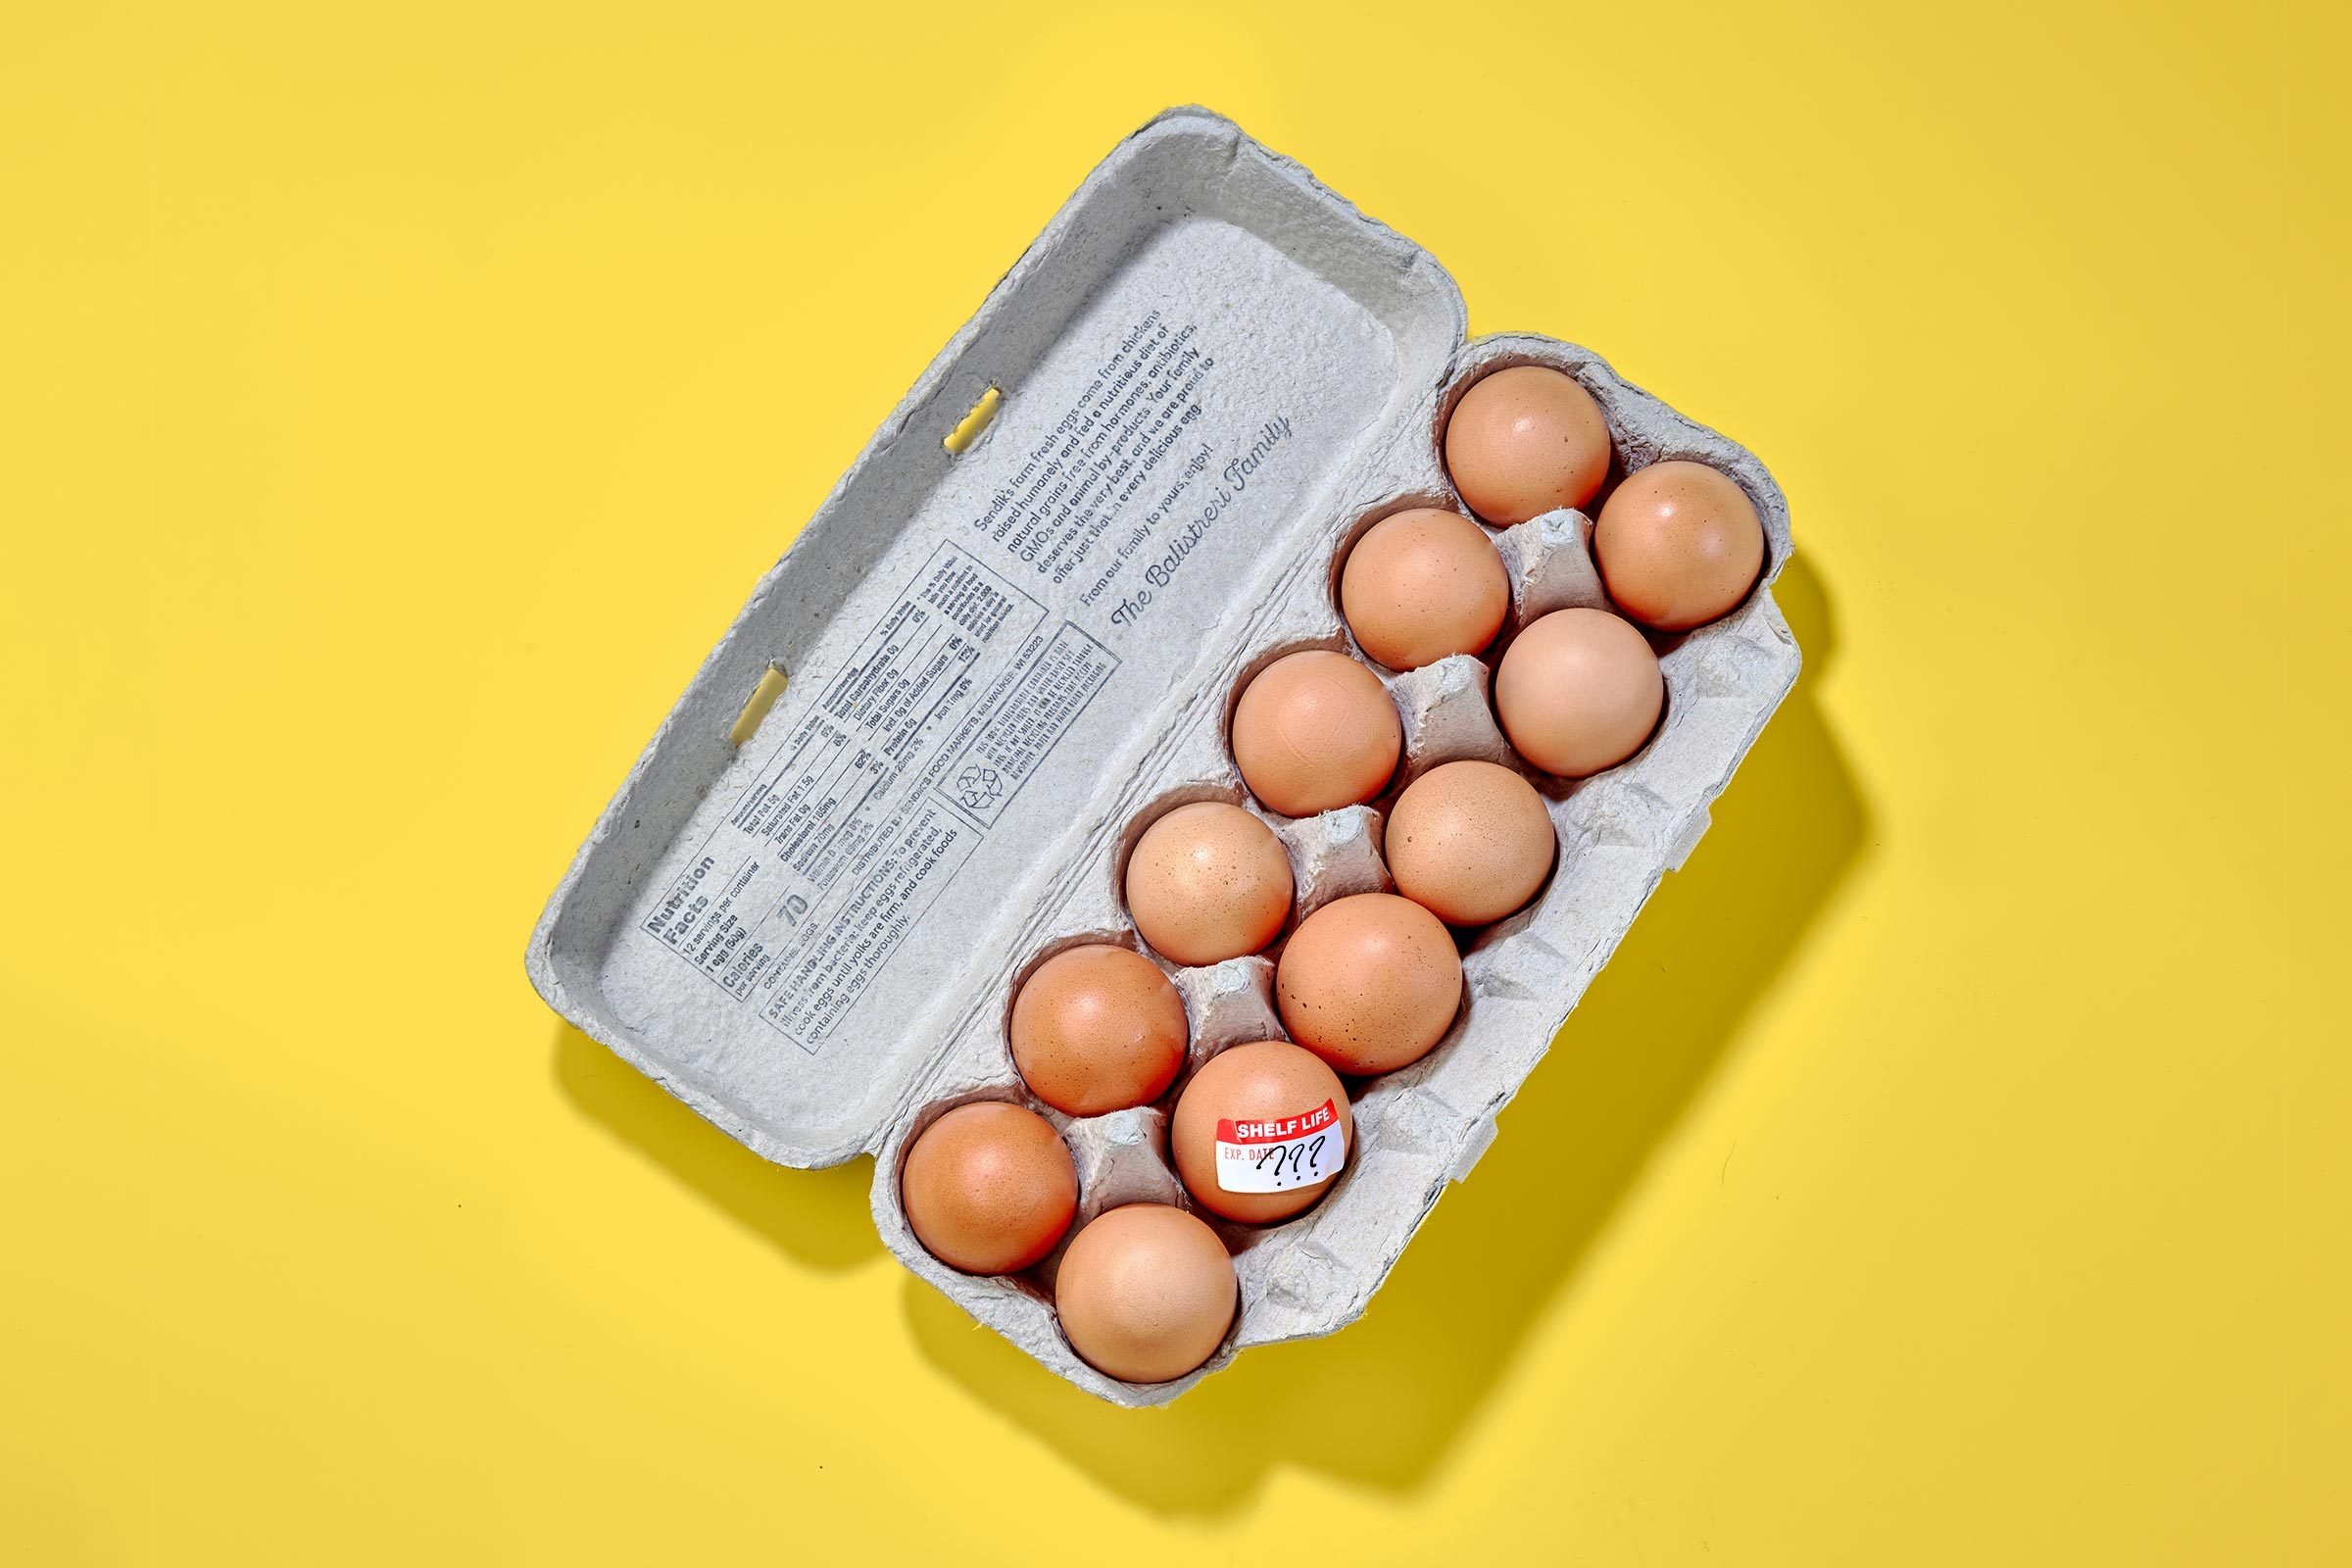 3 Simple Tests to Determine if Your Eggs Have Gone Bad